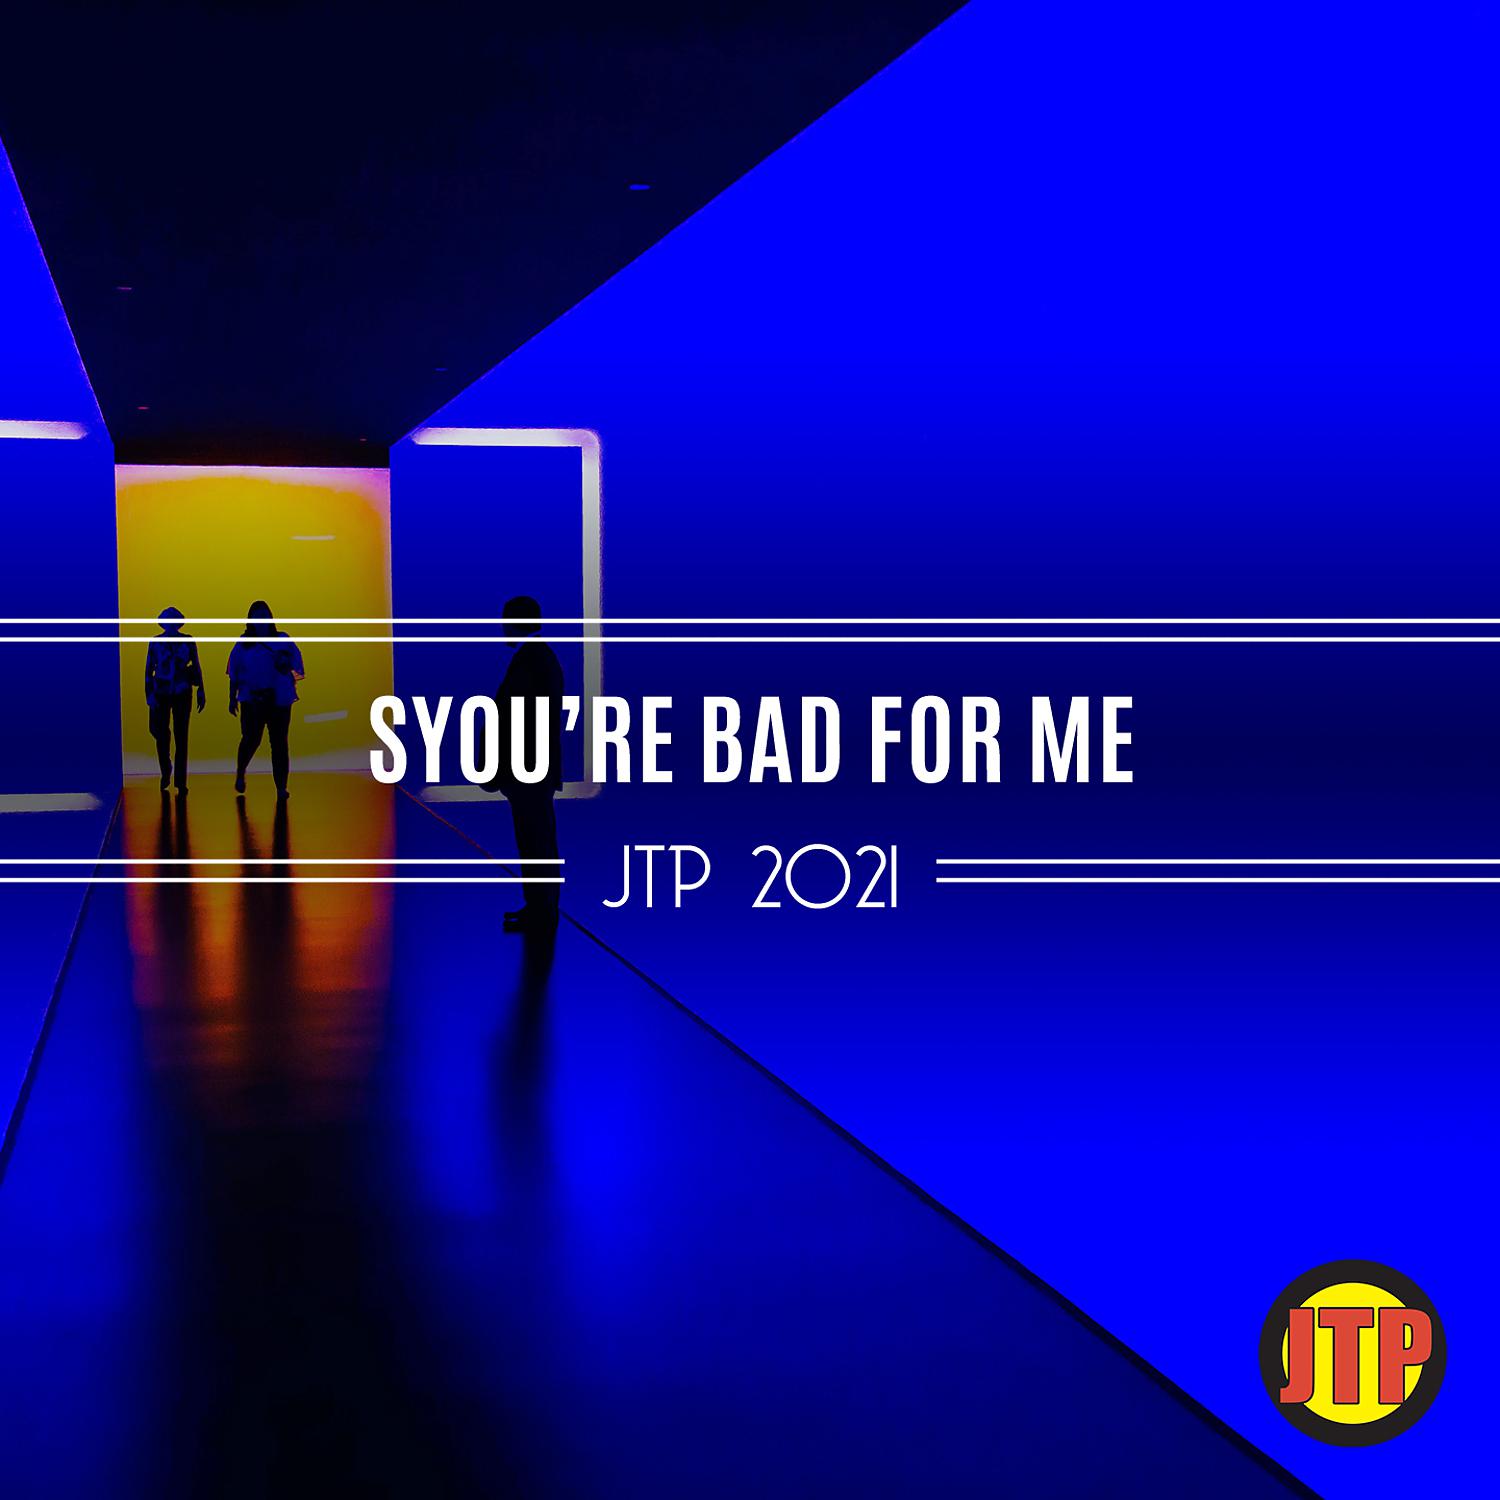 Постер альбома SYou're Bad For Me Jtp 2021